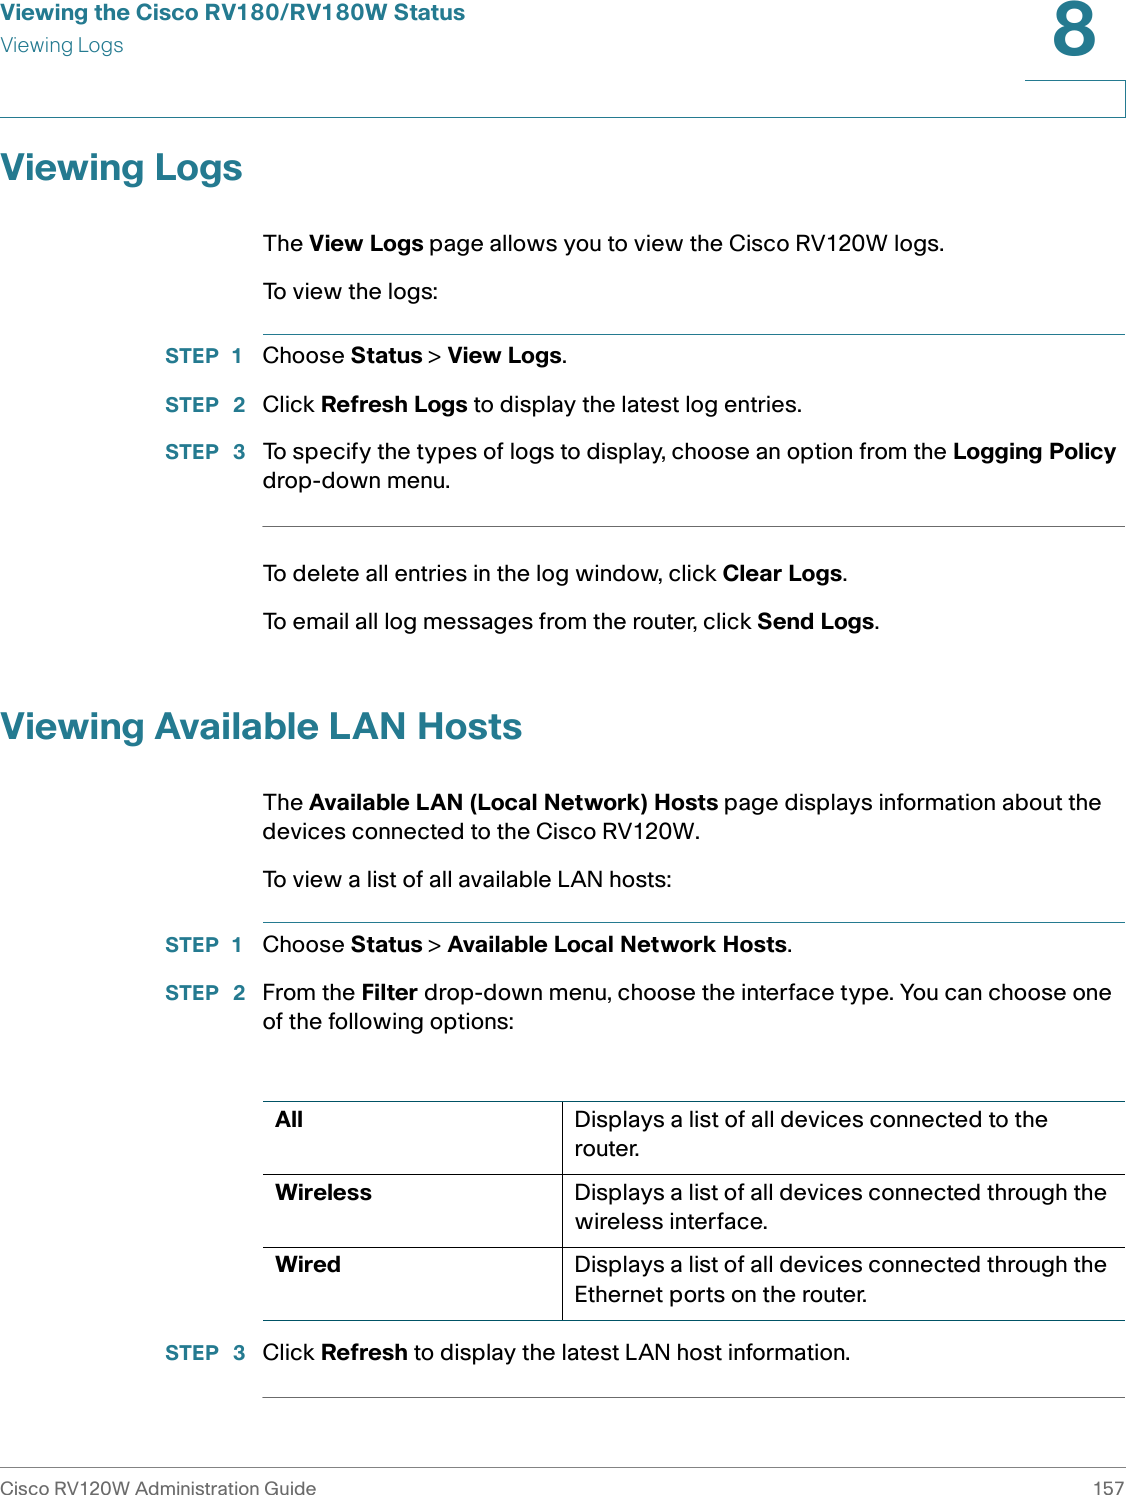 Viewing the Cisco RV180/RV180W StatusViewing LogsCisco RV120W Administration Guide 1578 Viewing LogsThe View Logs page allows you to view the Cisco RV120W logs.To view the logs:STEP 1 Choose Status &gt; View Logs. STEP  2 Click Refresh Logs to display the latest log entries.STEP  3 To specify the types of logs to display, choose an option from the Logging Policy drop-down menu.To delete all entries in the log window, click Clear Logs. To email all log messages from the router, click Send Logs.Viewing Available LAN HostsThe Available LAN (Local Network) Hosts page displays information about the devices connected to the Cisco RV120W.To view a list of all available LAN hosts:STEP 1 Choose Status &gt; Available Local Network Hosts.STEP  2 From the Filter drop-down menu, choose the interface type. You can choose one of the following options:STEP  3 Click Refresh to display the latest LAN host information.All Displays a list of all devices connected to the router.Wireless Displays a list of all devices connected through the wireless interface.Wired Displays a list of all devices connected through the Ethernet ports on the router. 